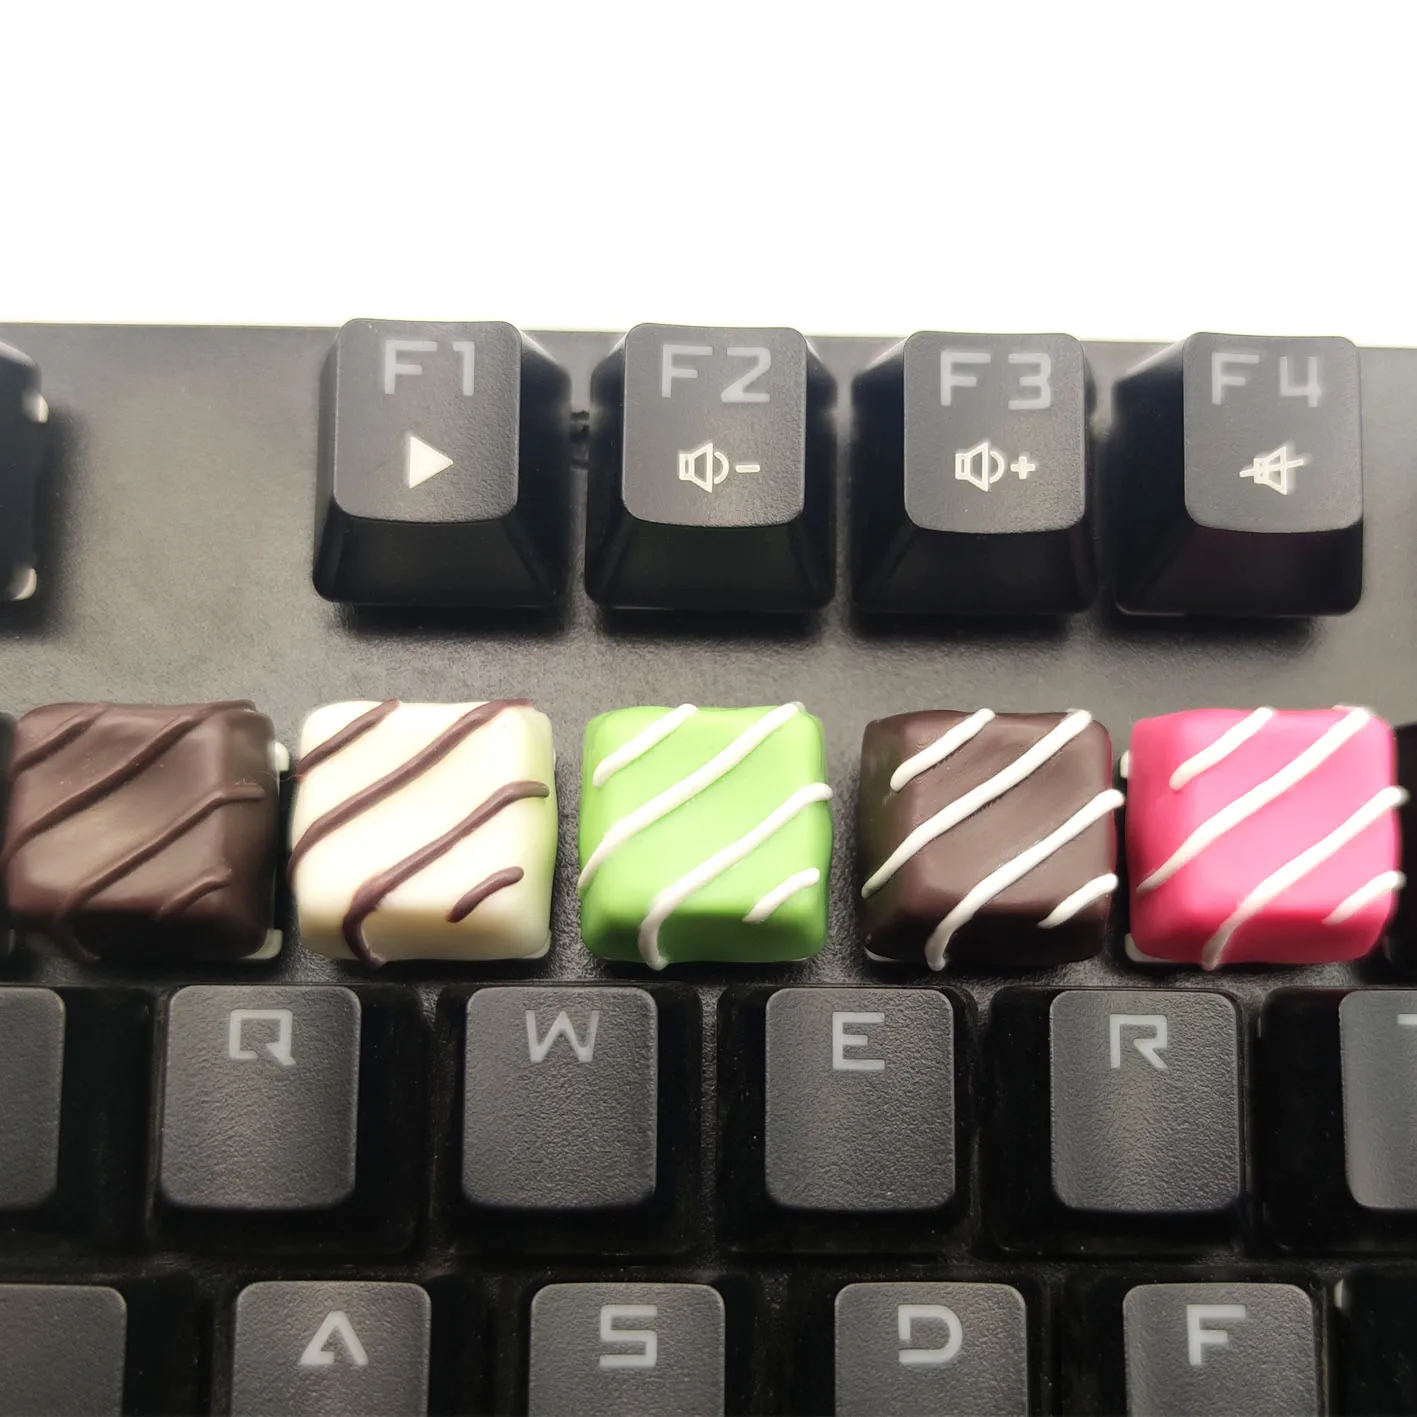 Chocolate Design White Brown Pink Green Resin Keycaps For Cherry Gateron Kailh Box TTC Switch Mechanical Gaming Keyboard Key Cap